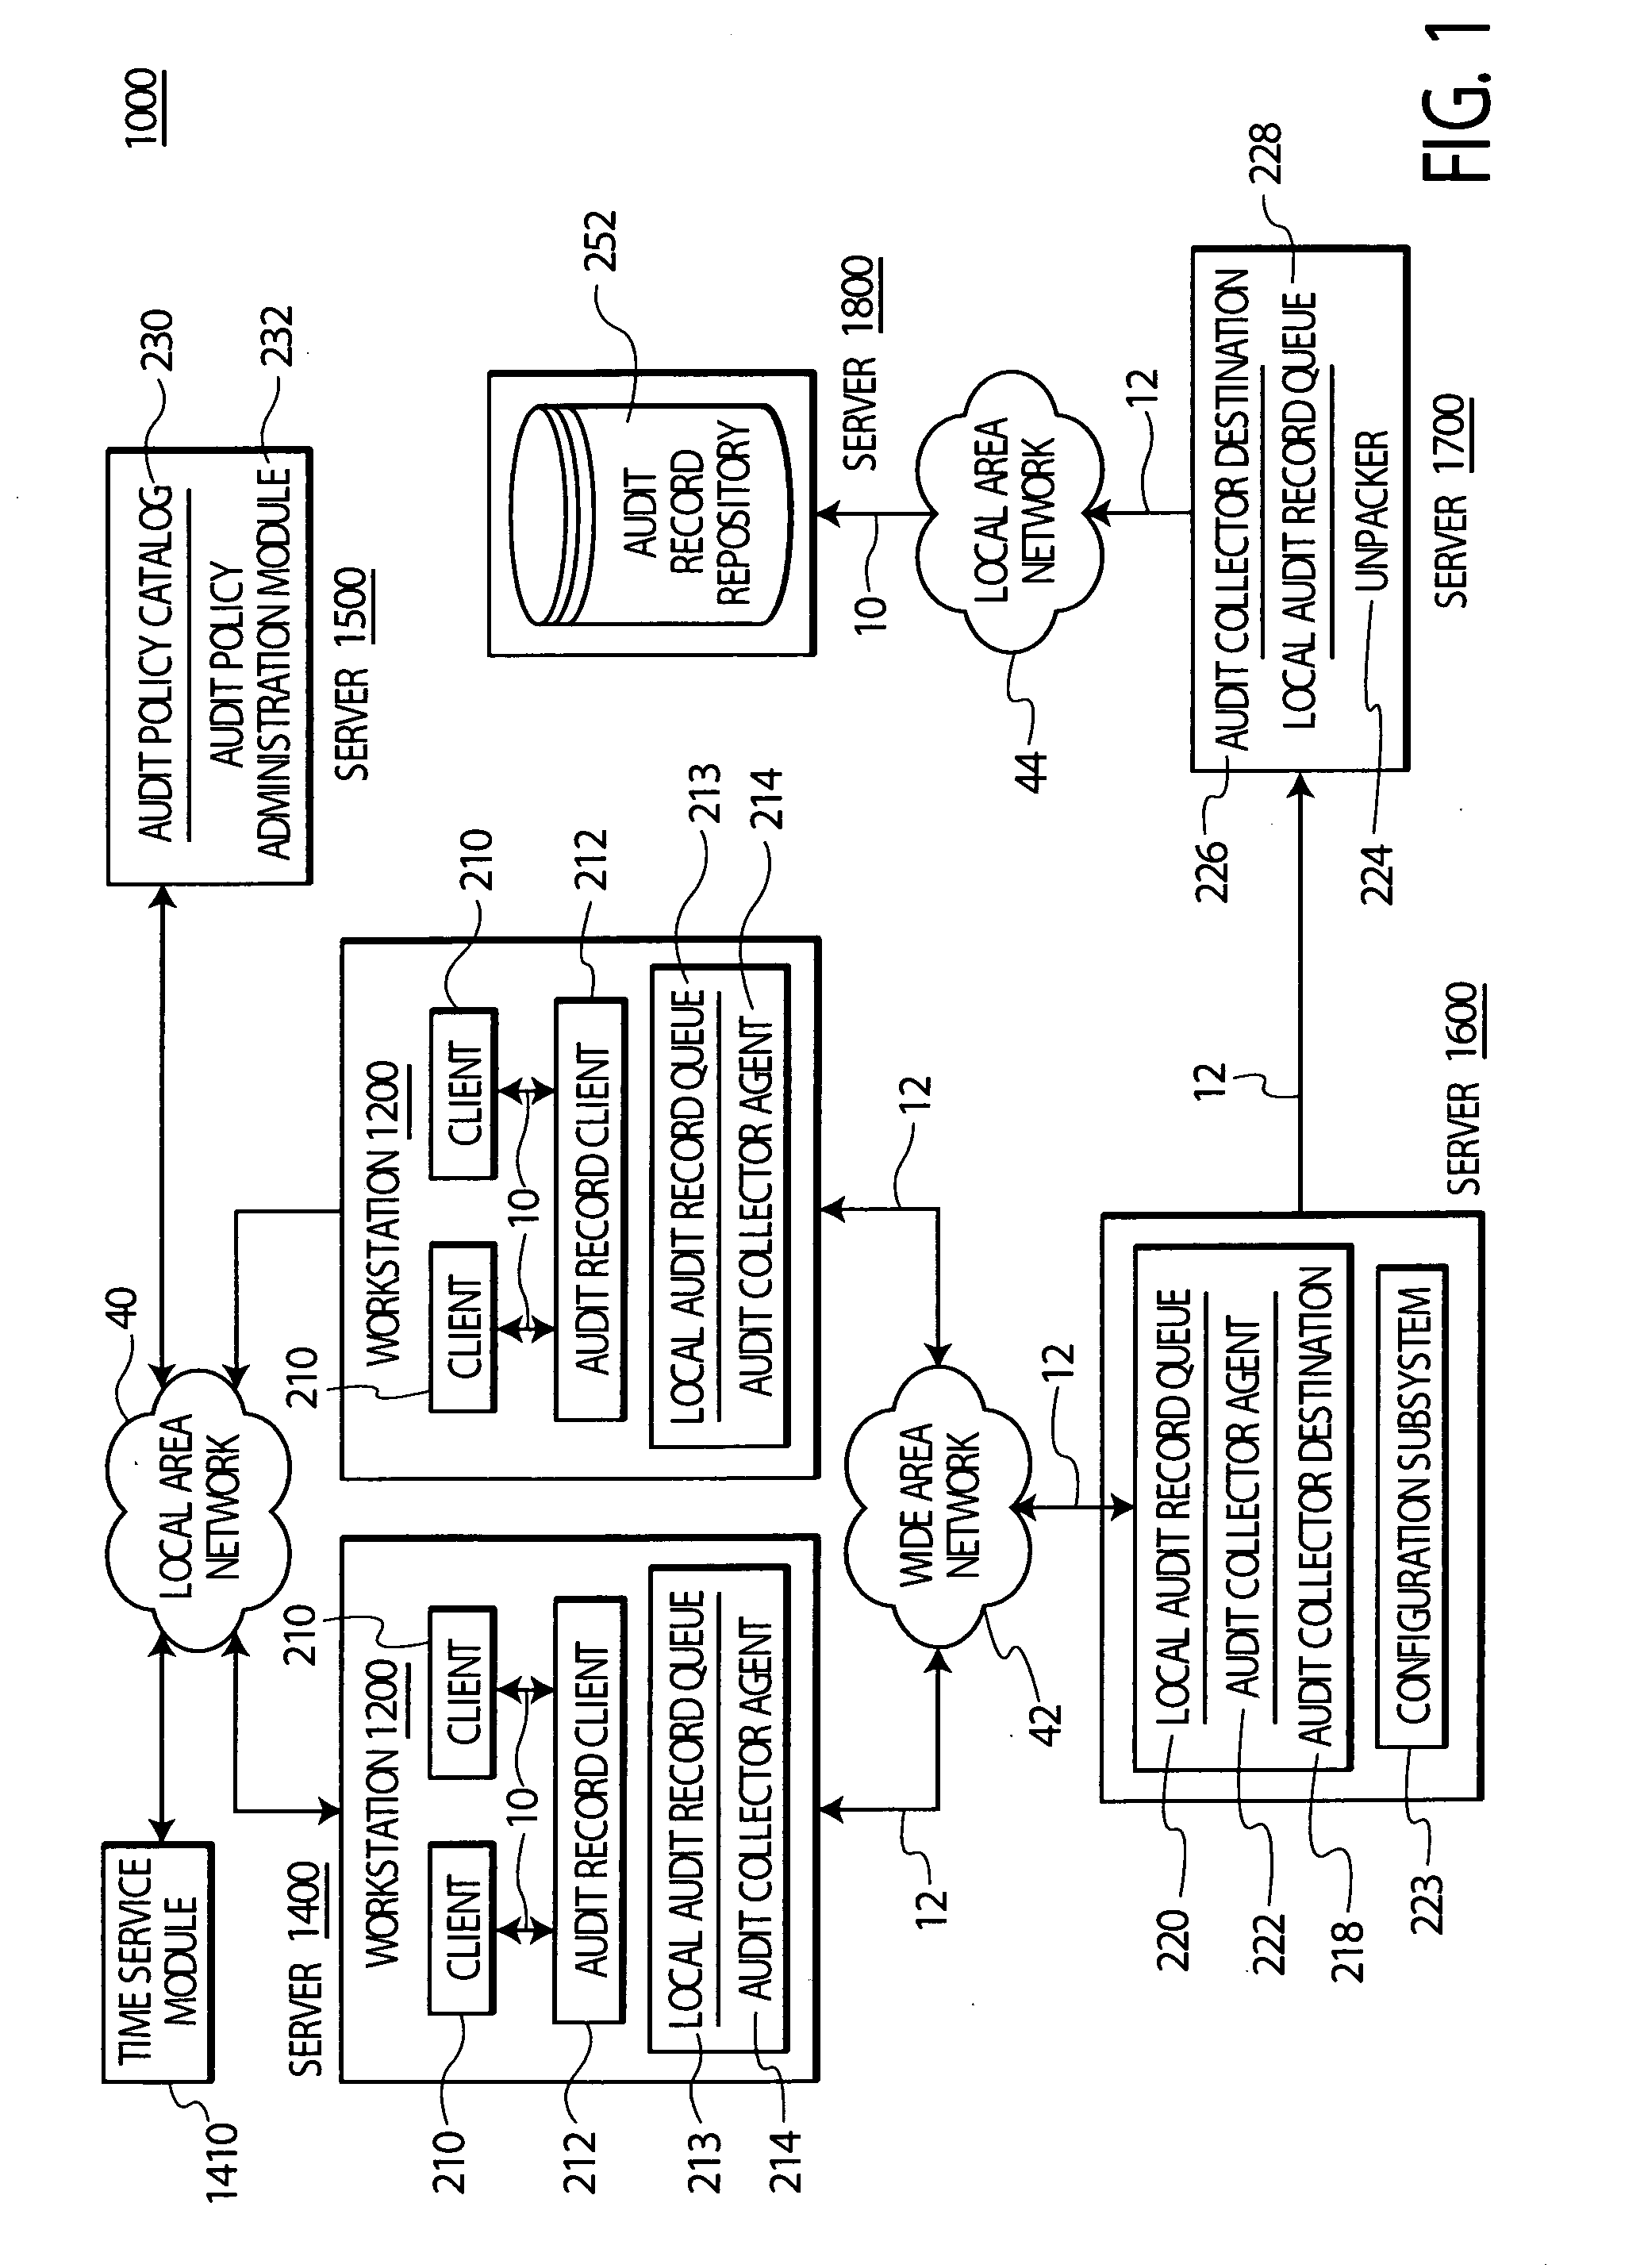 System and method for processing audit records